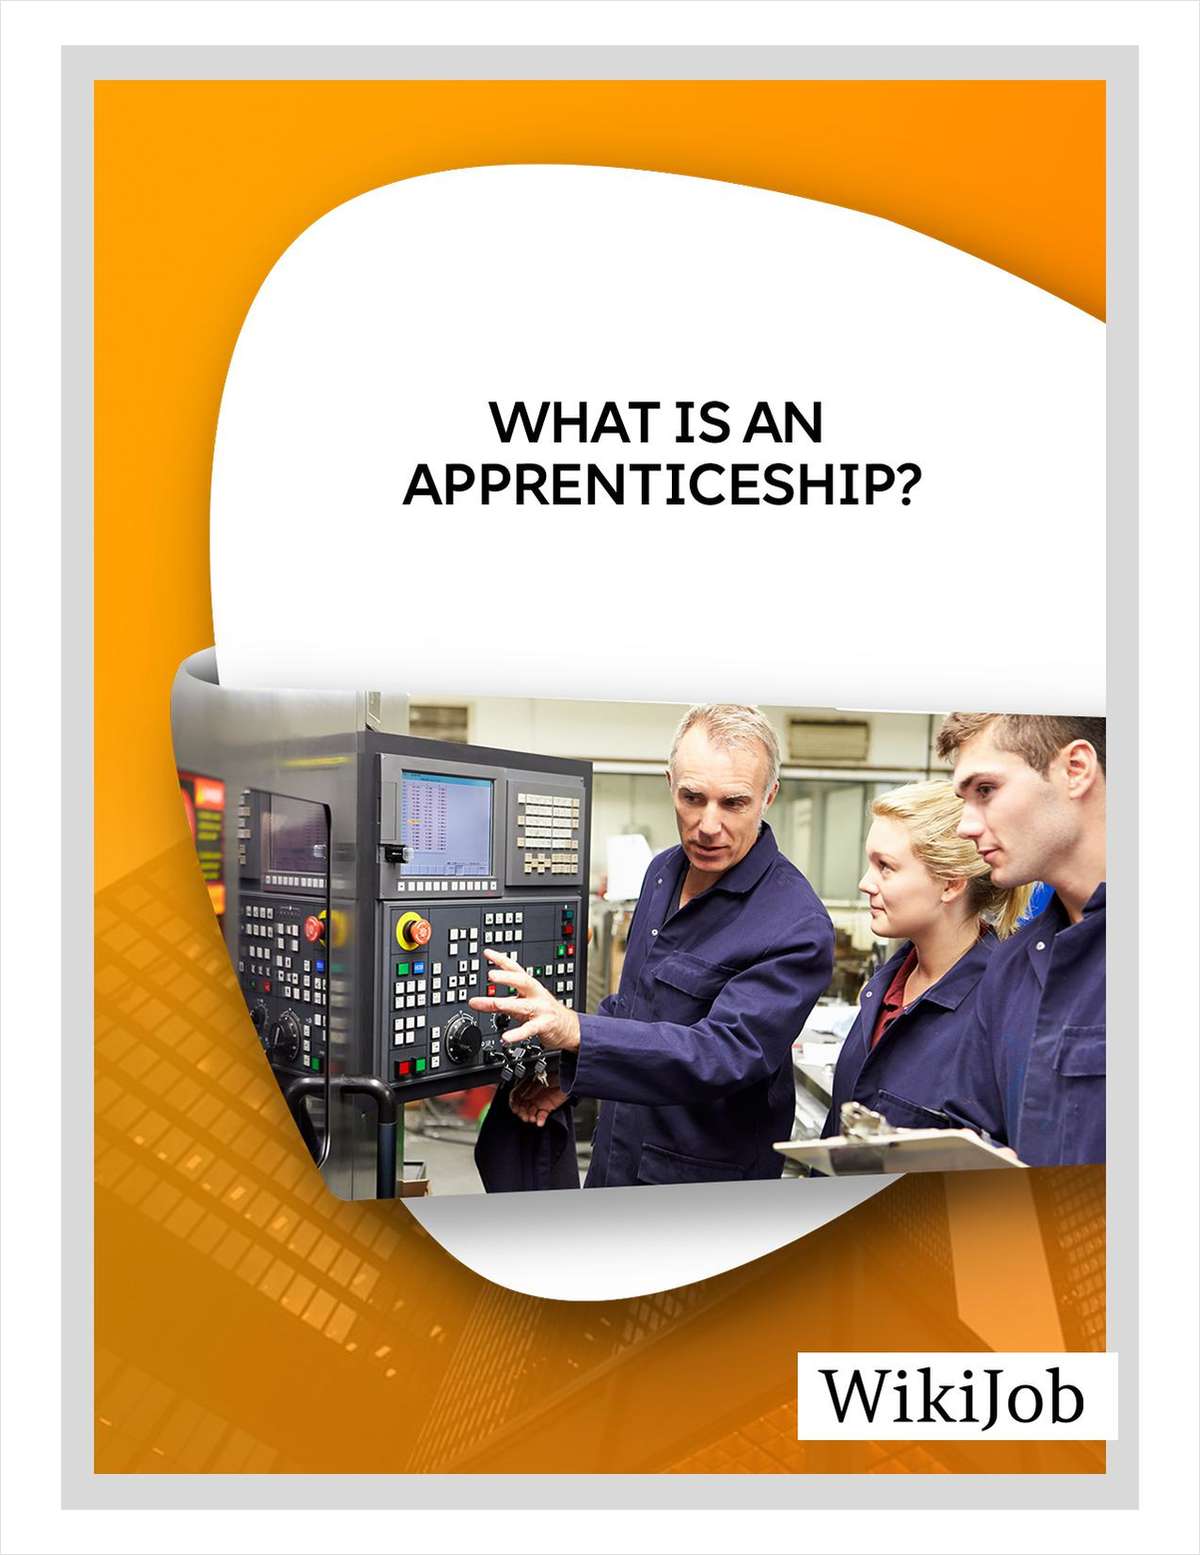 What Is an Apprenticeship?